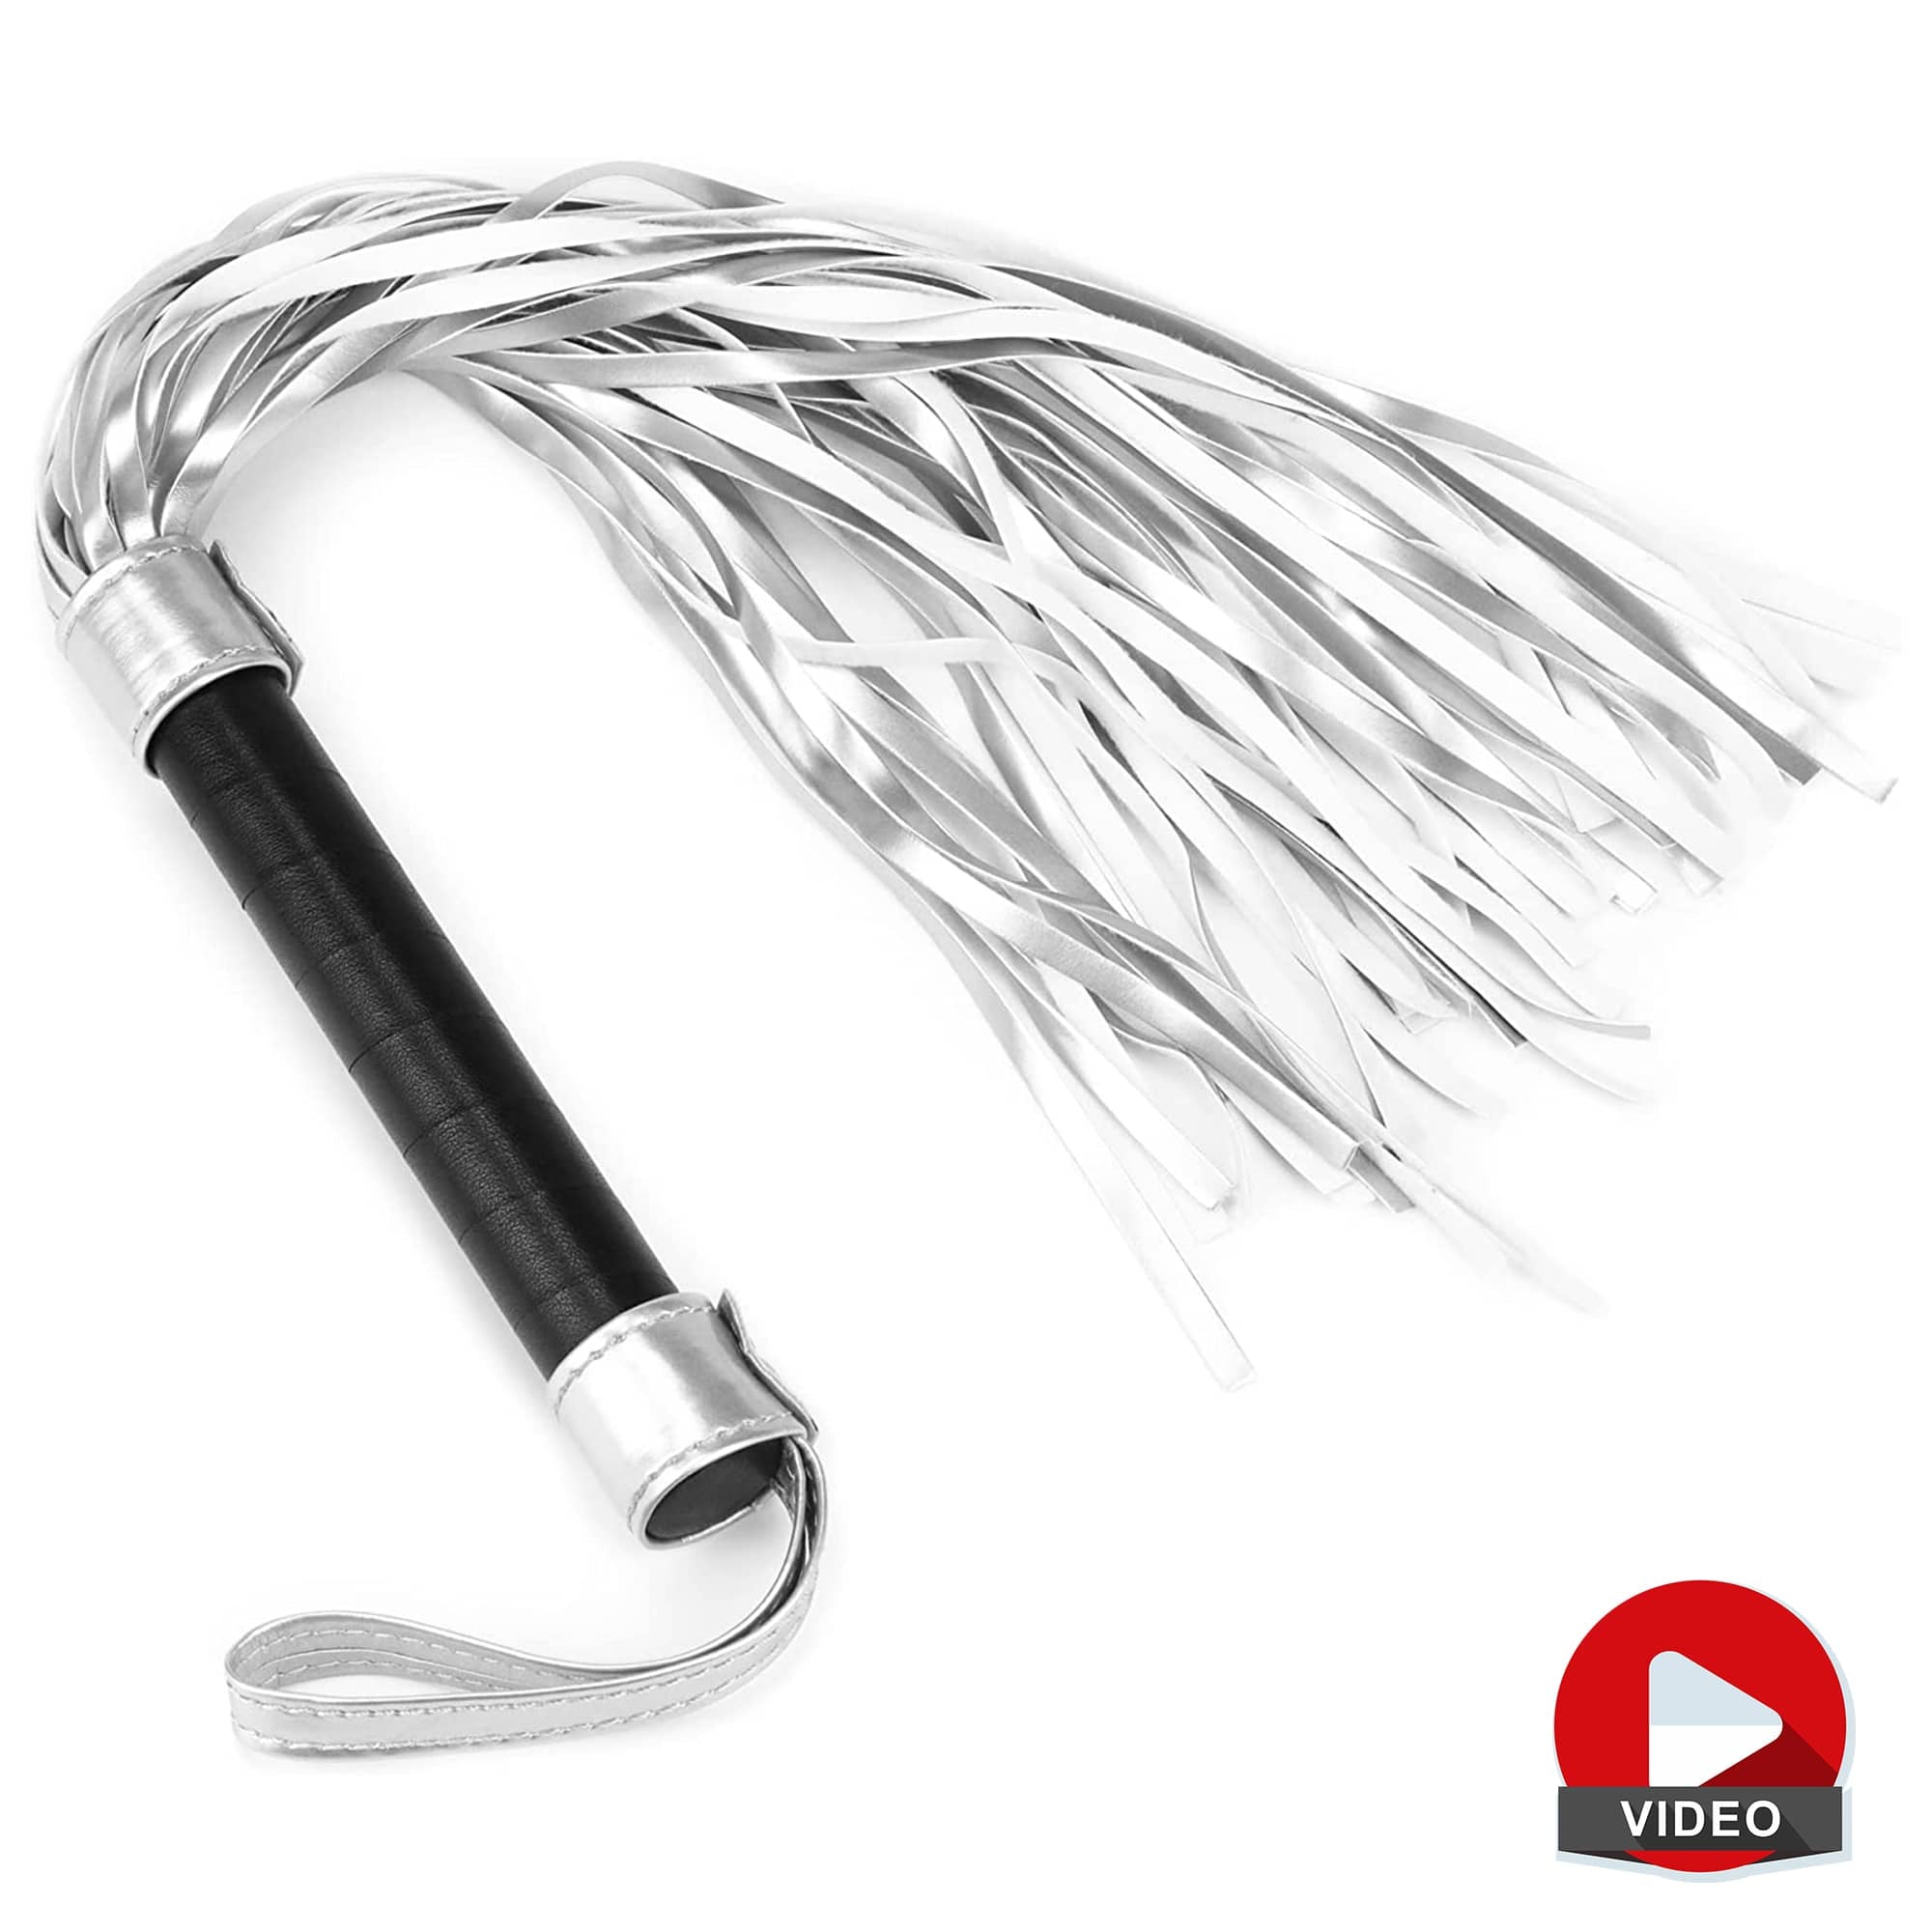 The bdsm sex whip flogger for kinky play lays flat with a video playback logo